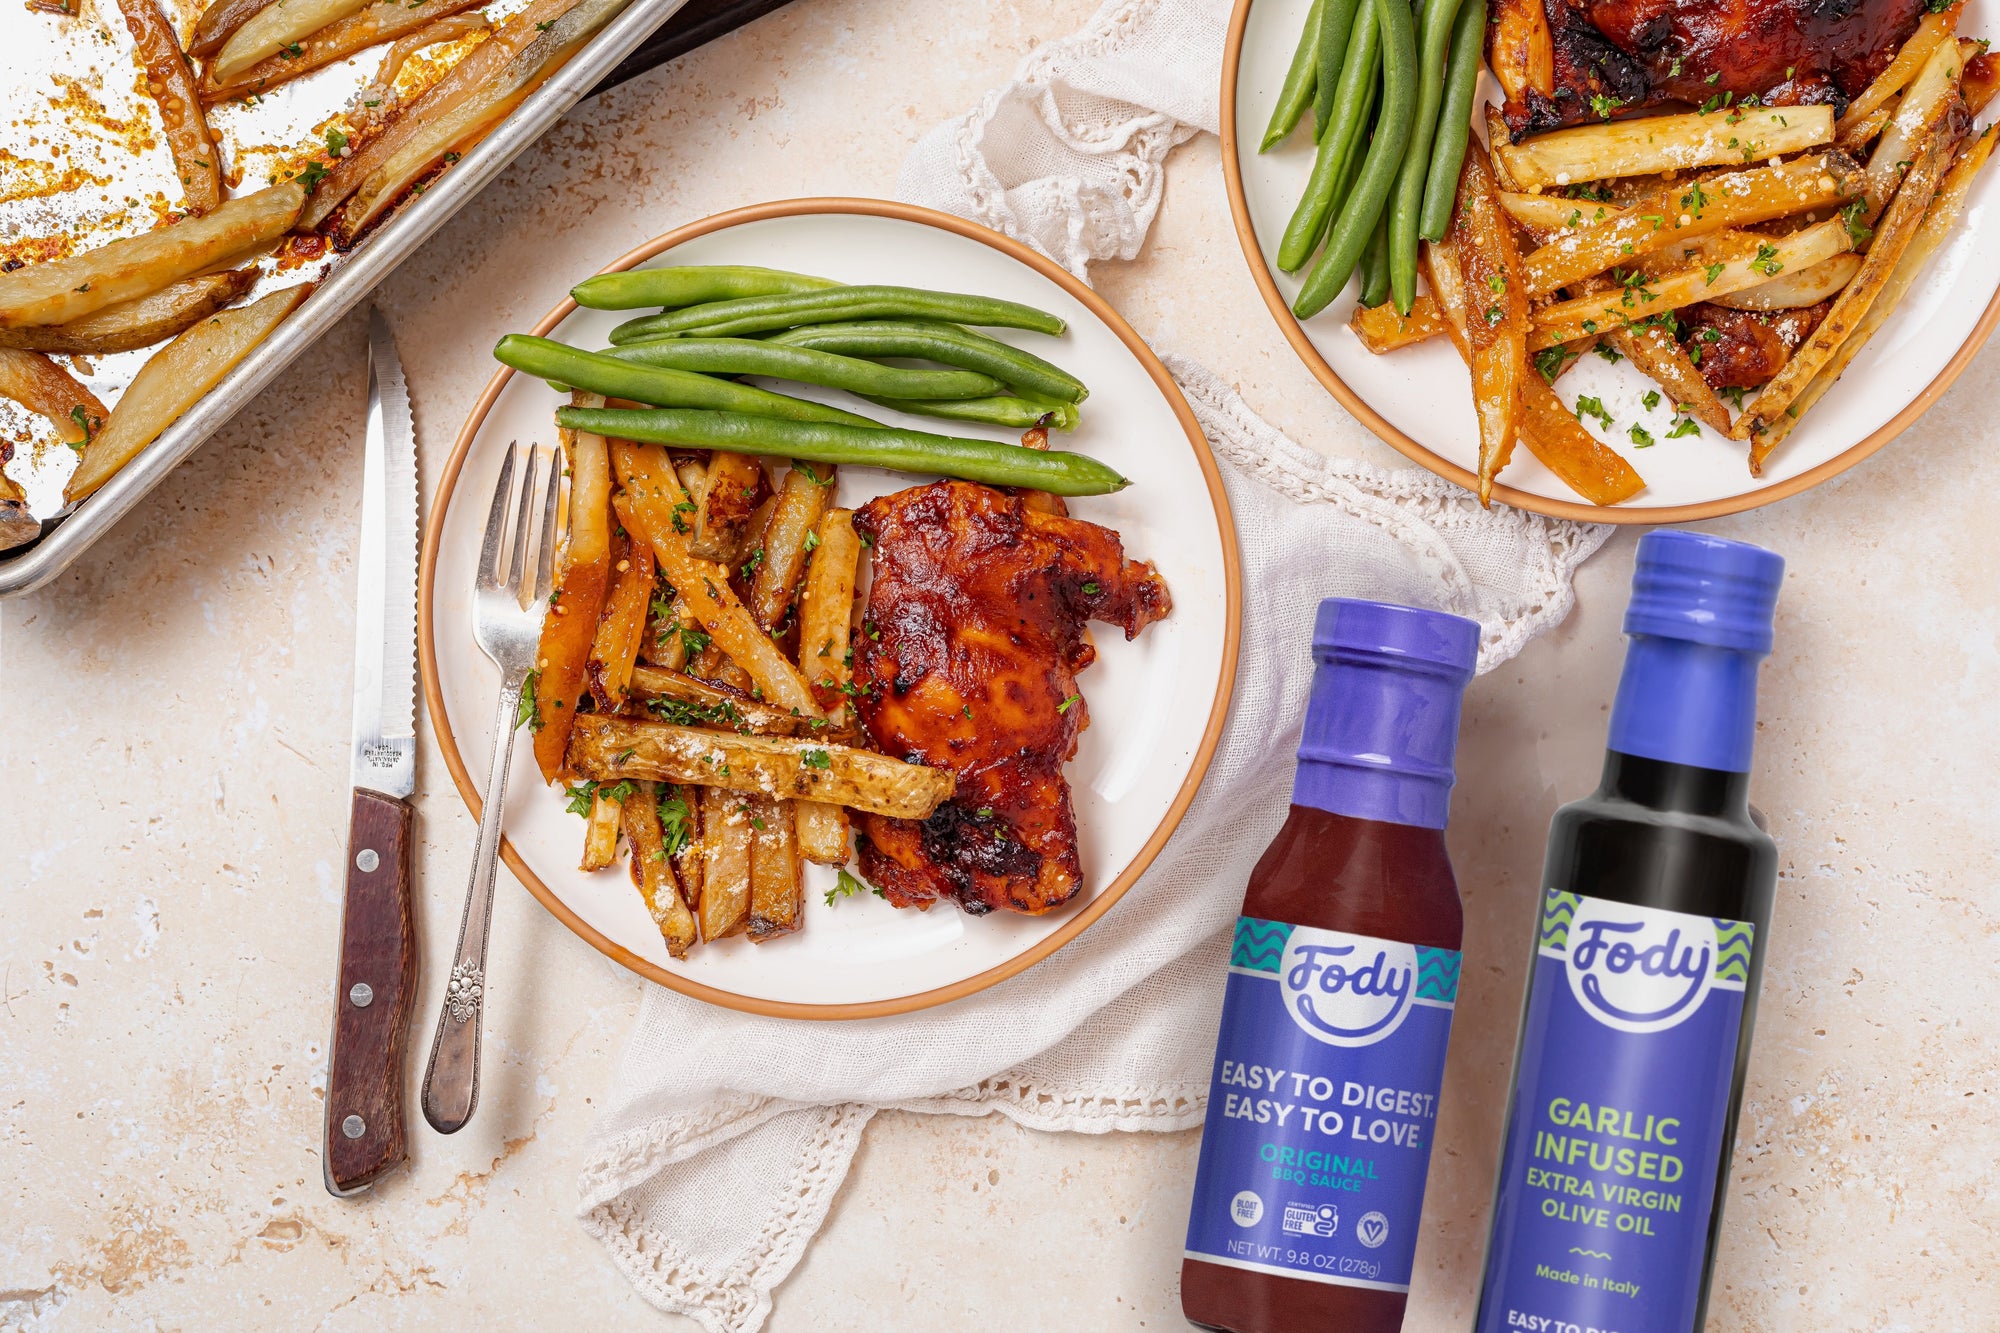 An image of Fody's Sheet Pan BBQ Chicken Thighs with Parmesan Truffle Fries laid out on white and brown plates, on a table next to two sauce bottles and elegant silver cutlery.